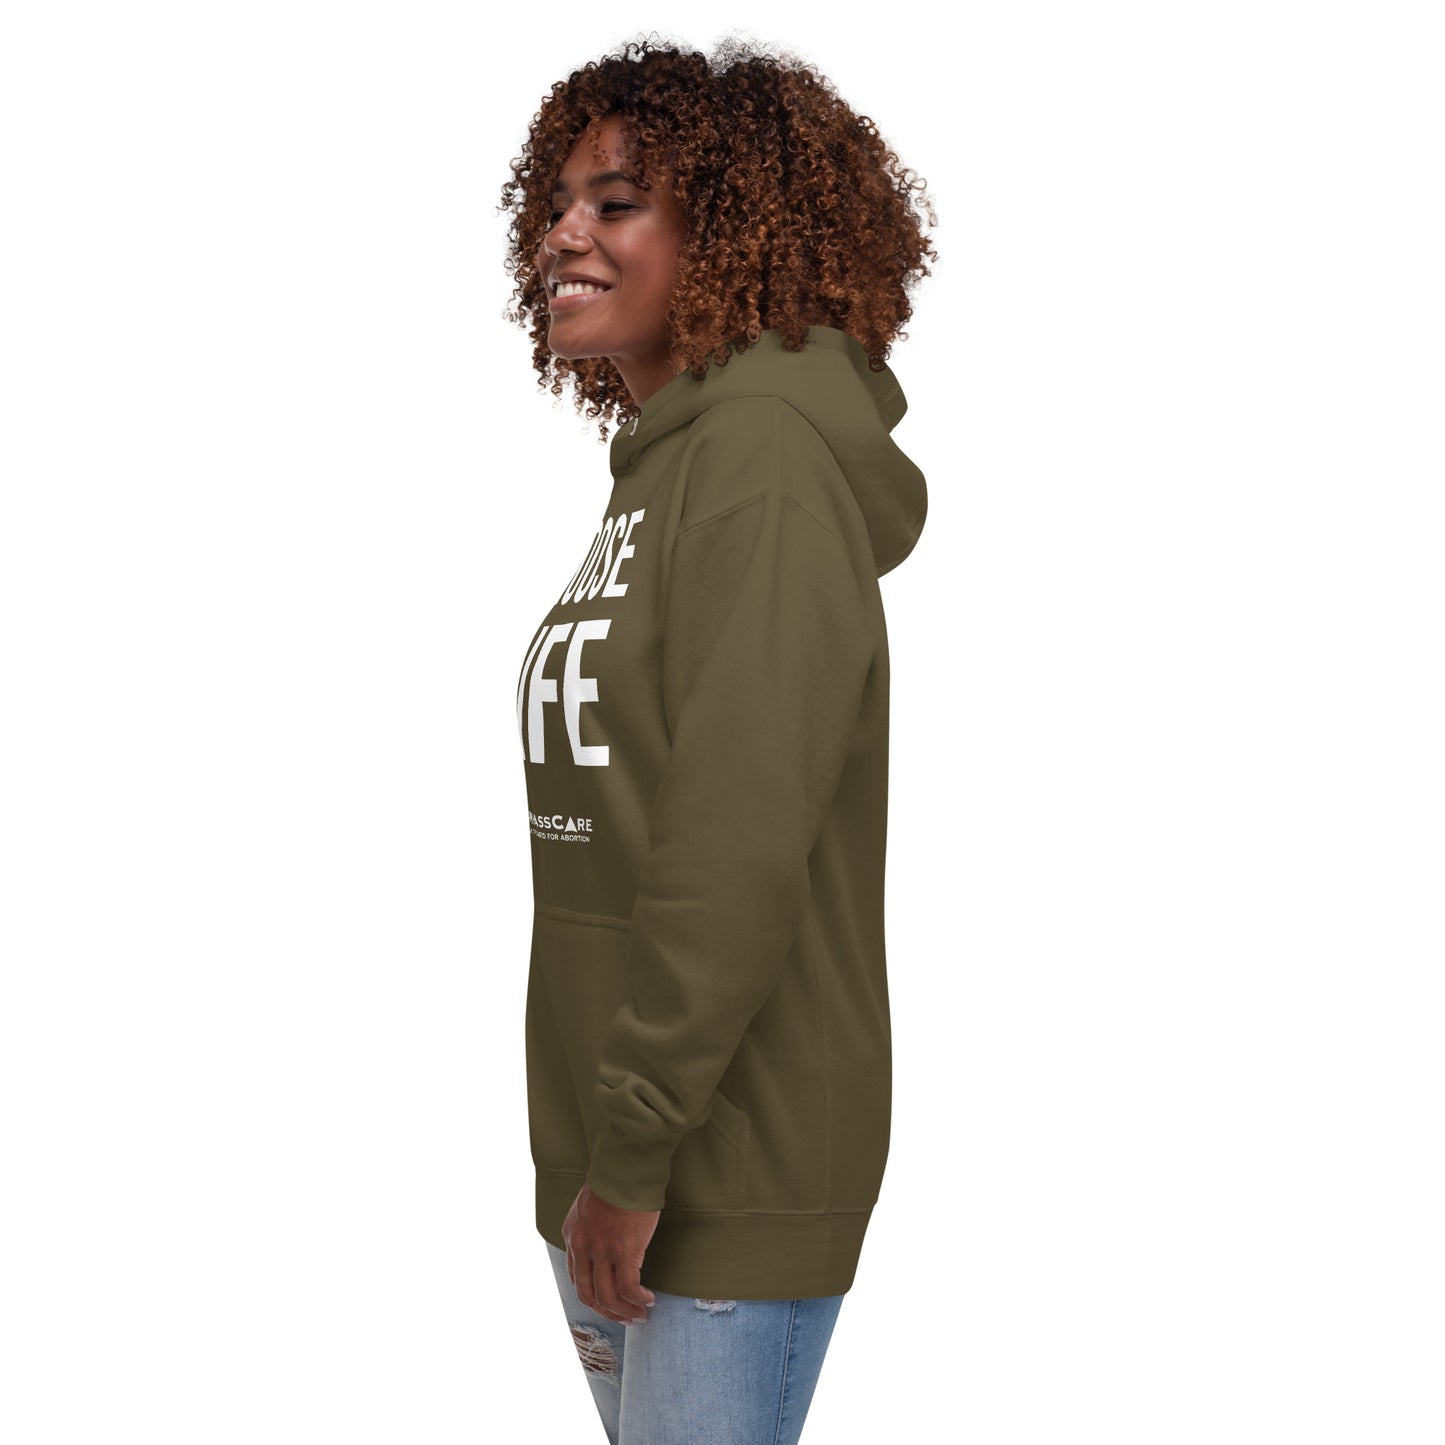 Pro-Life Unisex Hoodie (white letters)